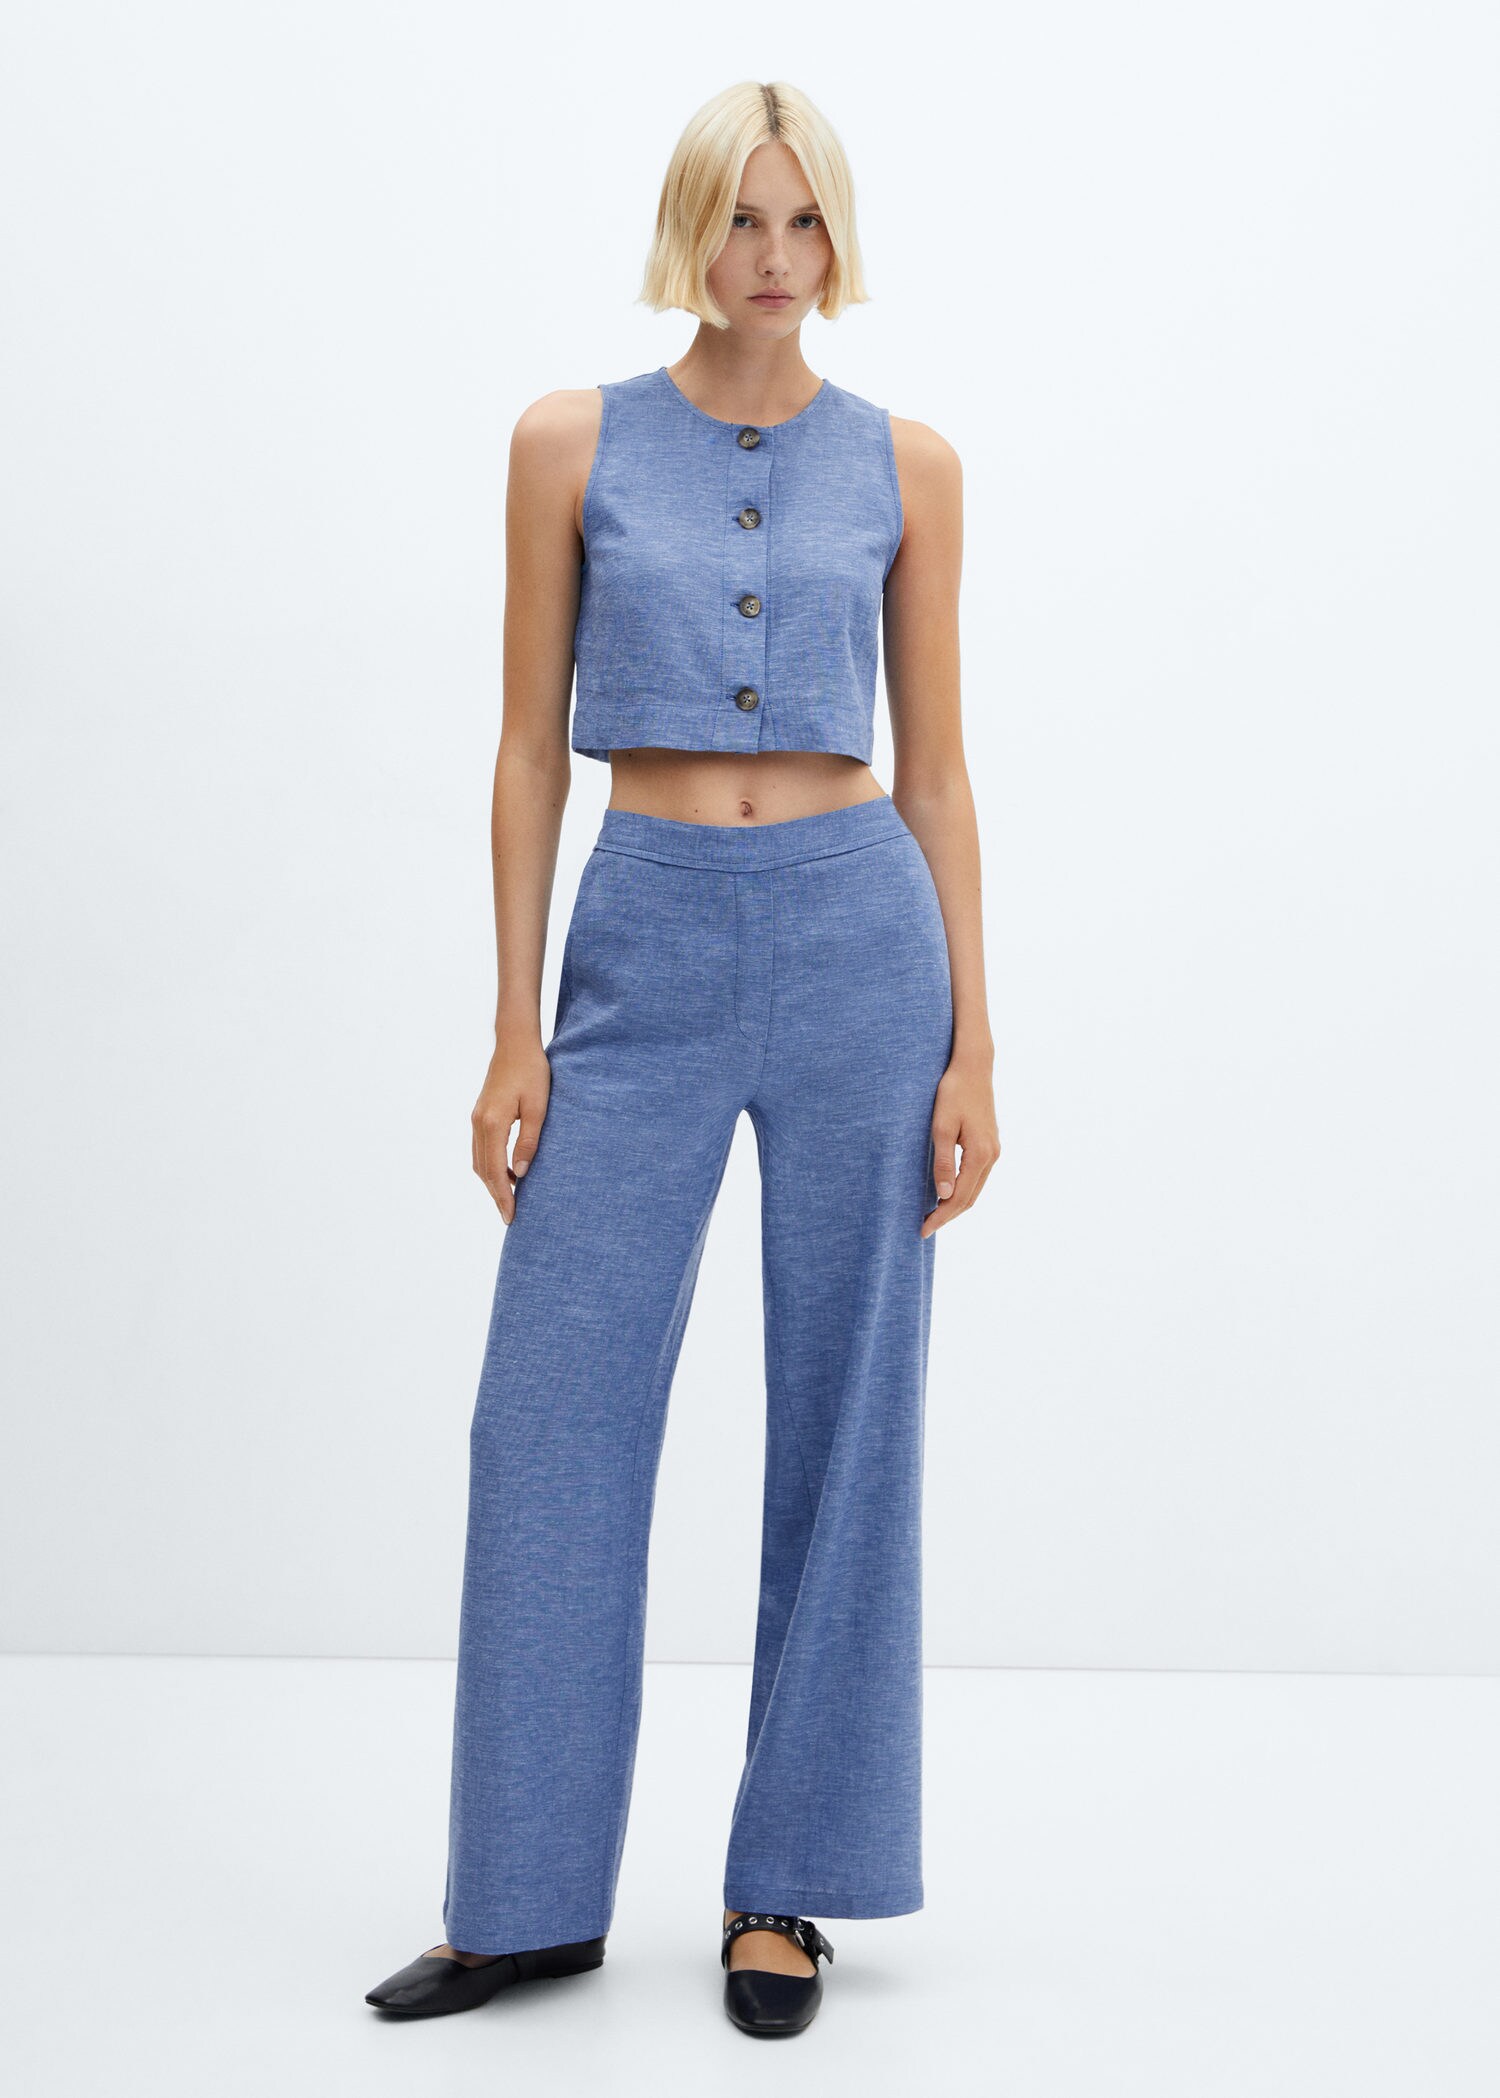 Powder Blue Embroidered Spagetti Crop Top With Flared Pant